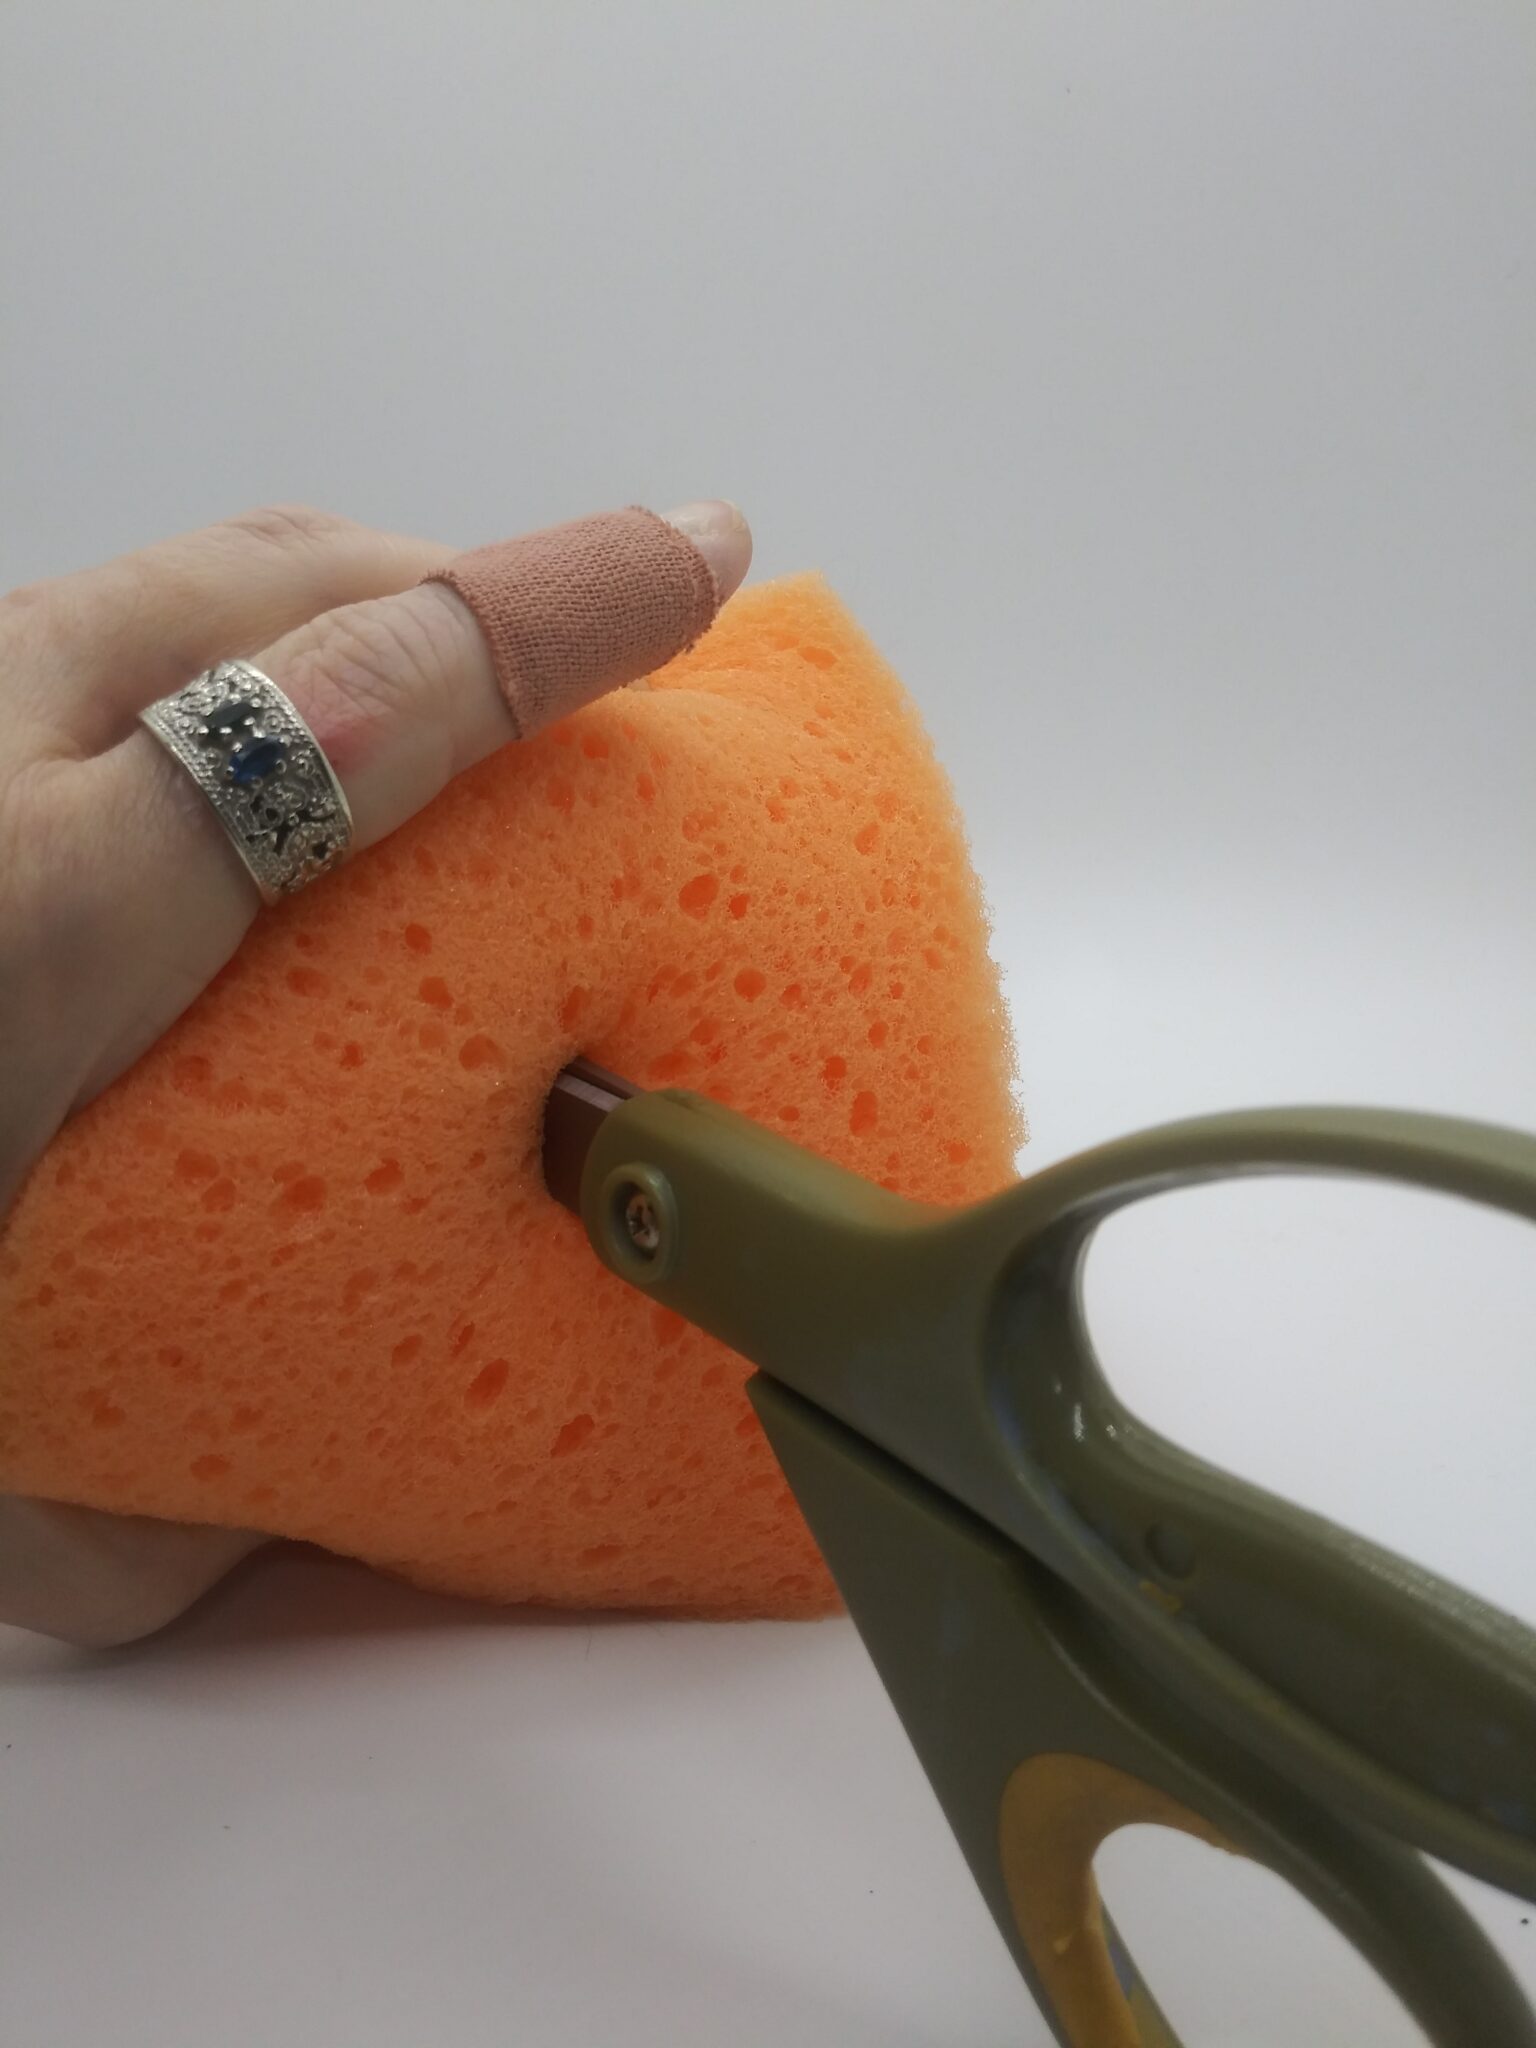 Real Feel DIY Fleshlight showing how to poke a hole in the sponge